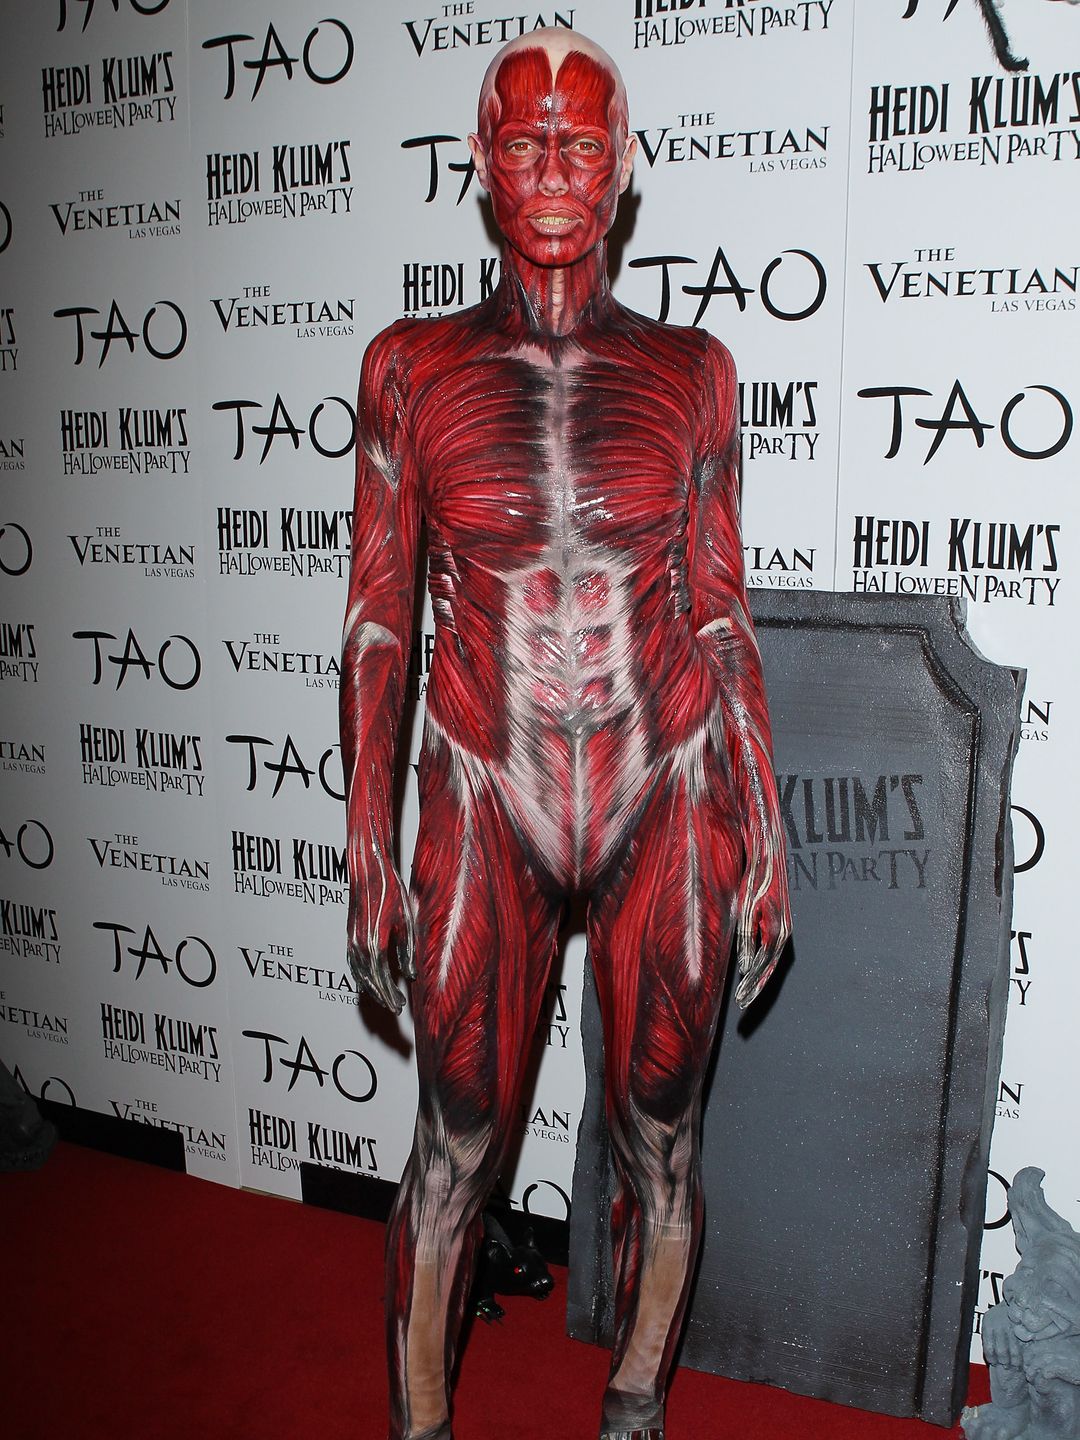 Heidi Klum dresses up as a skinless woman for her 12th annual Halloween party